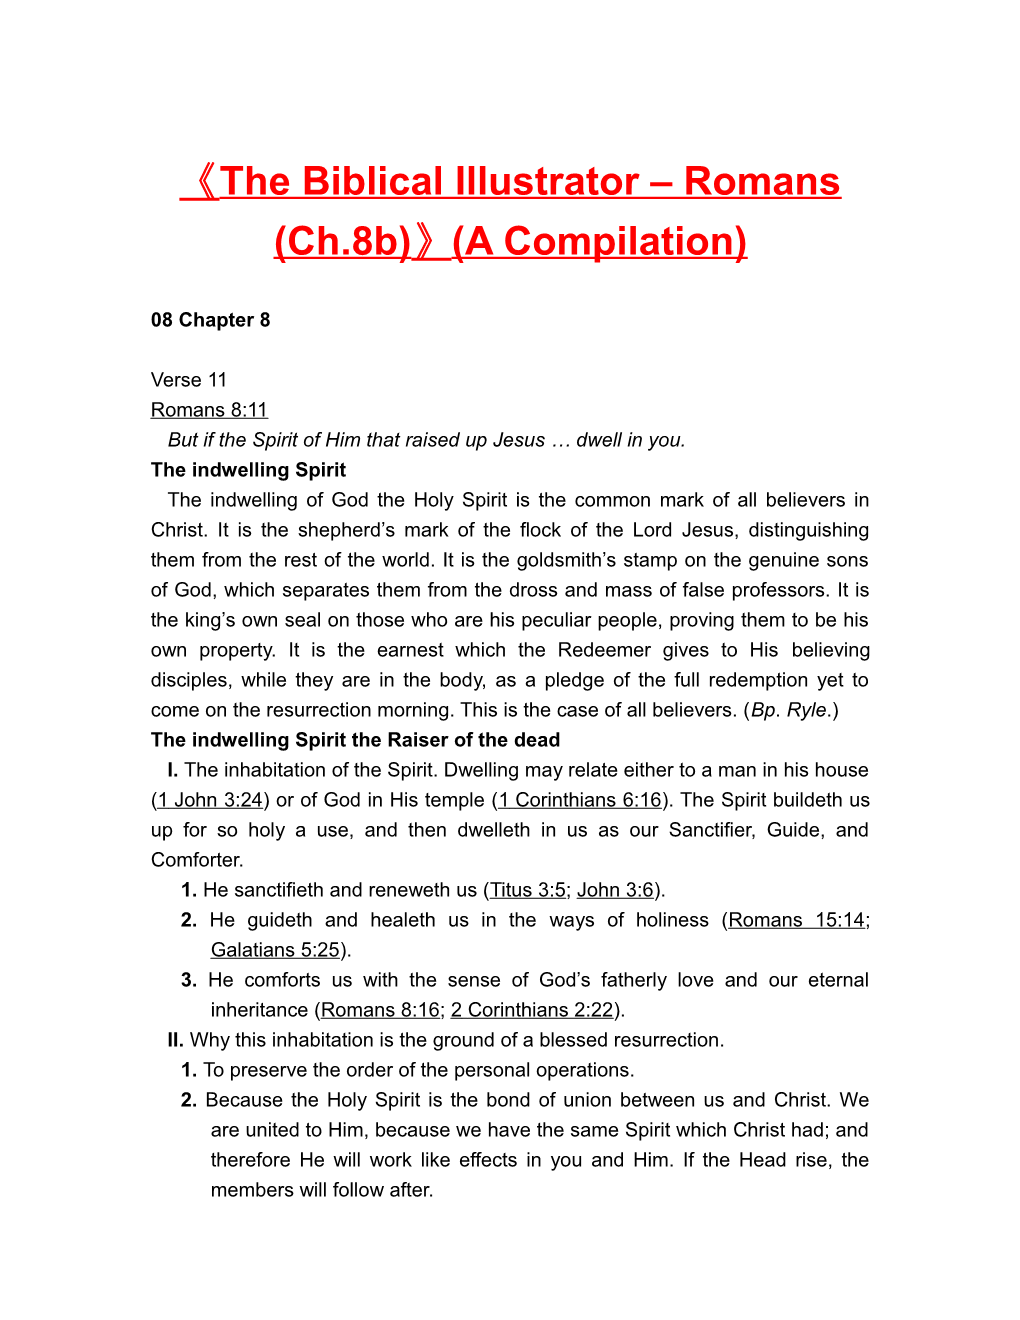 The Biblical Illustrator Romans (Ch.8B) (A Compilation)